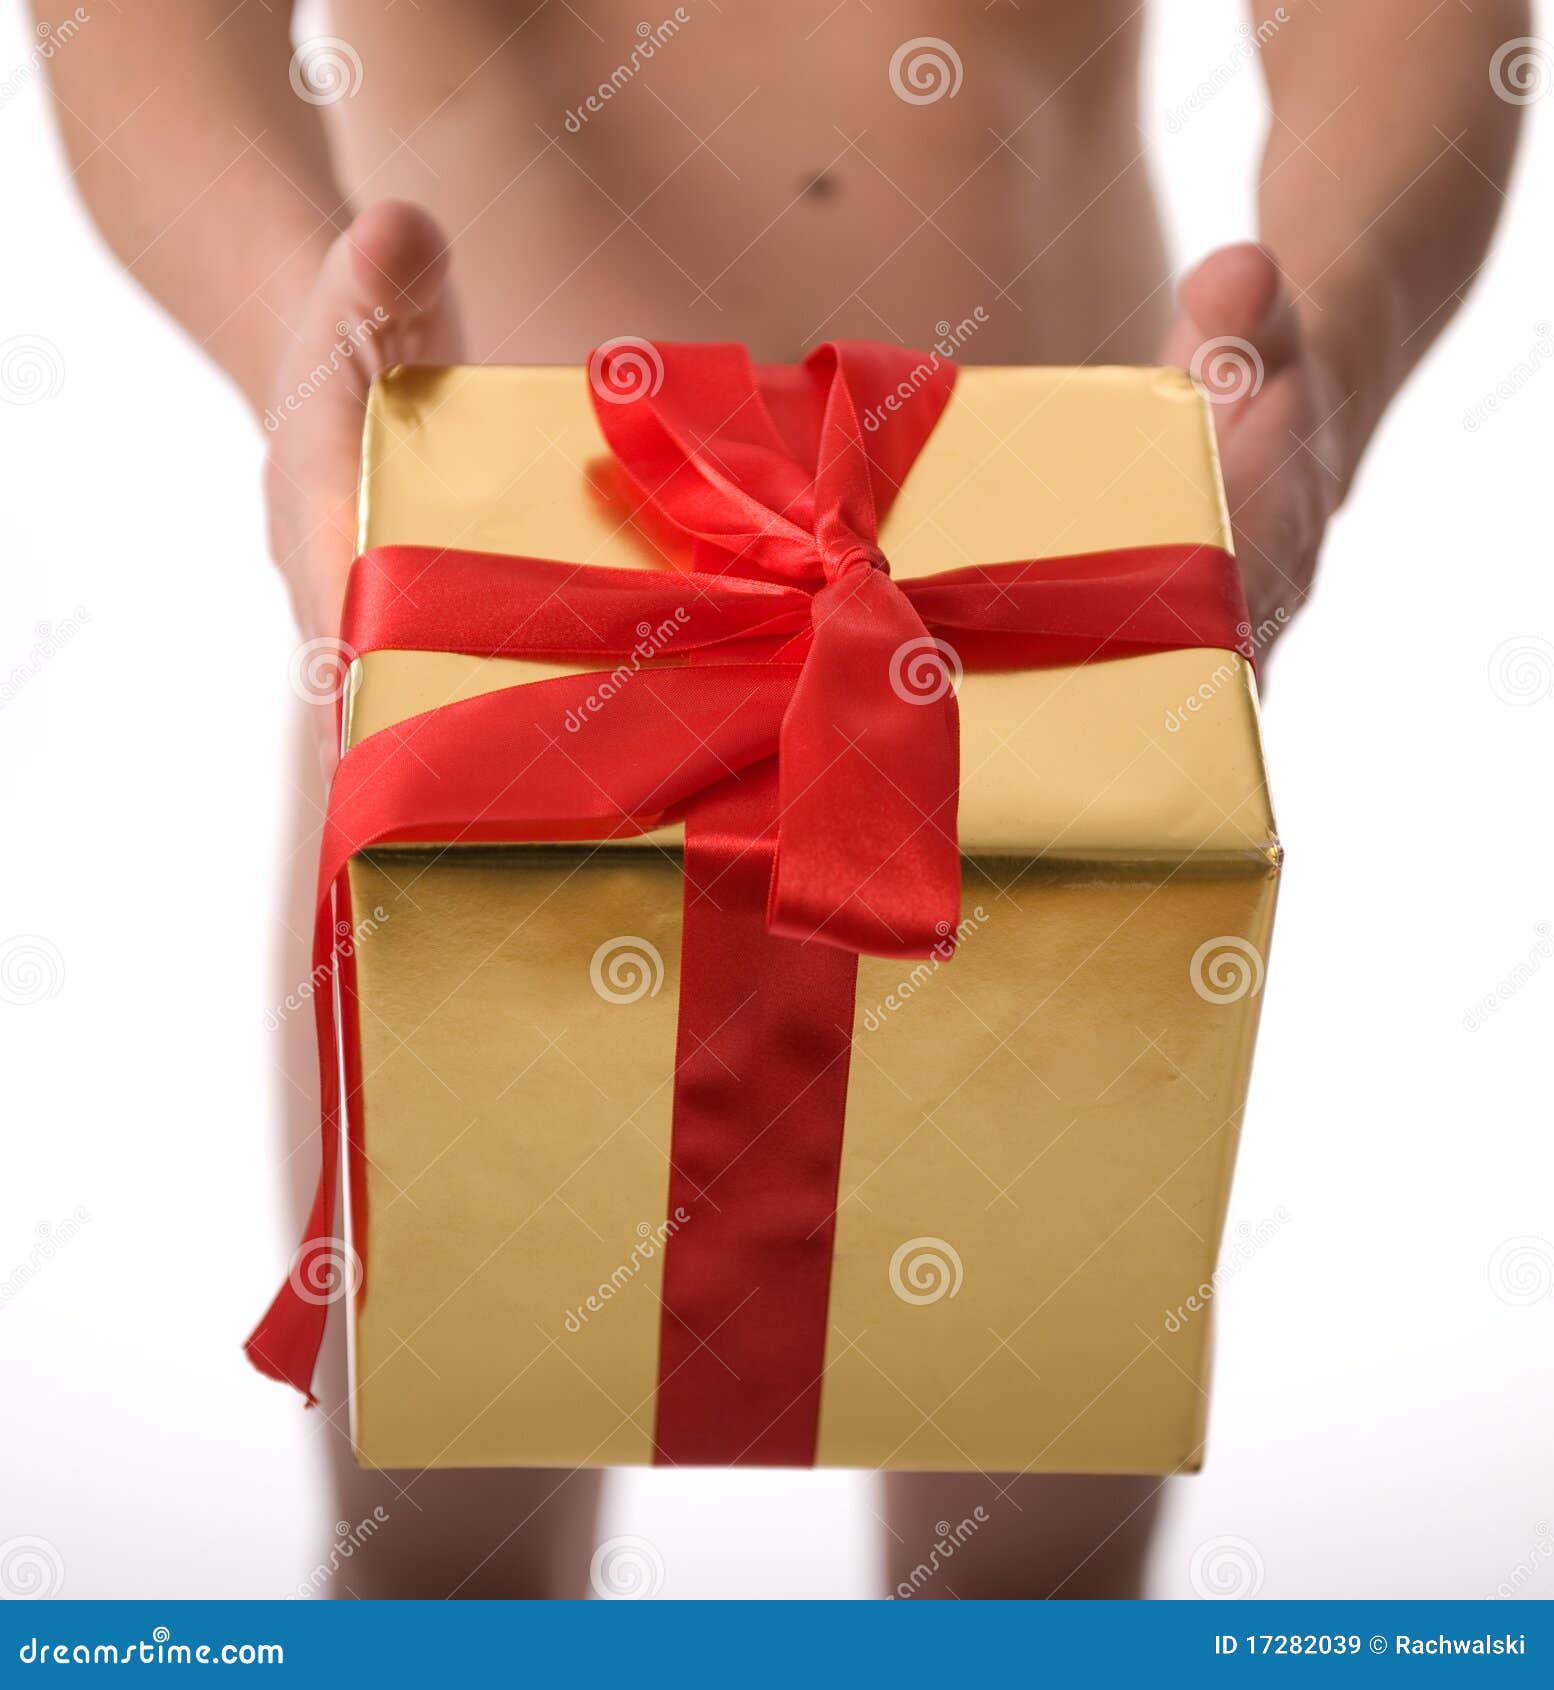 Naked Man With Gold Gift On White Background Stock Photo 